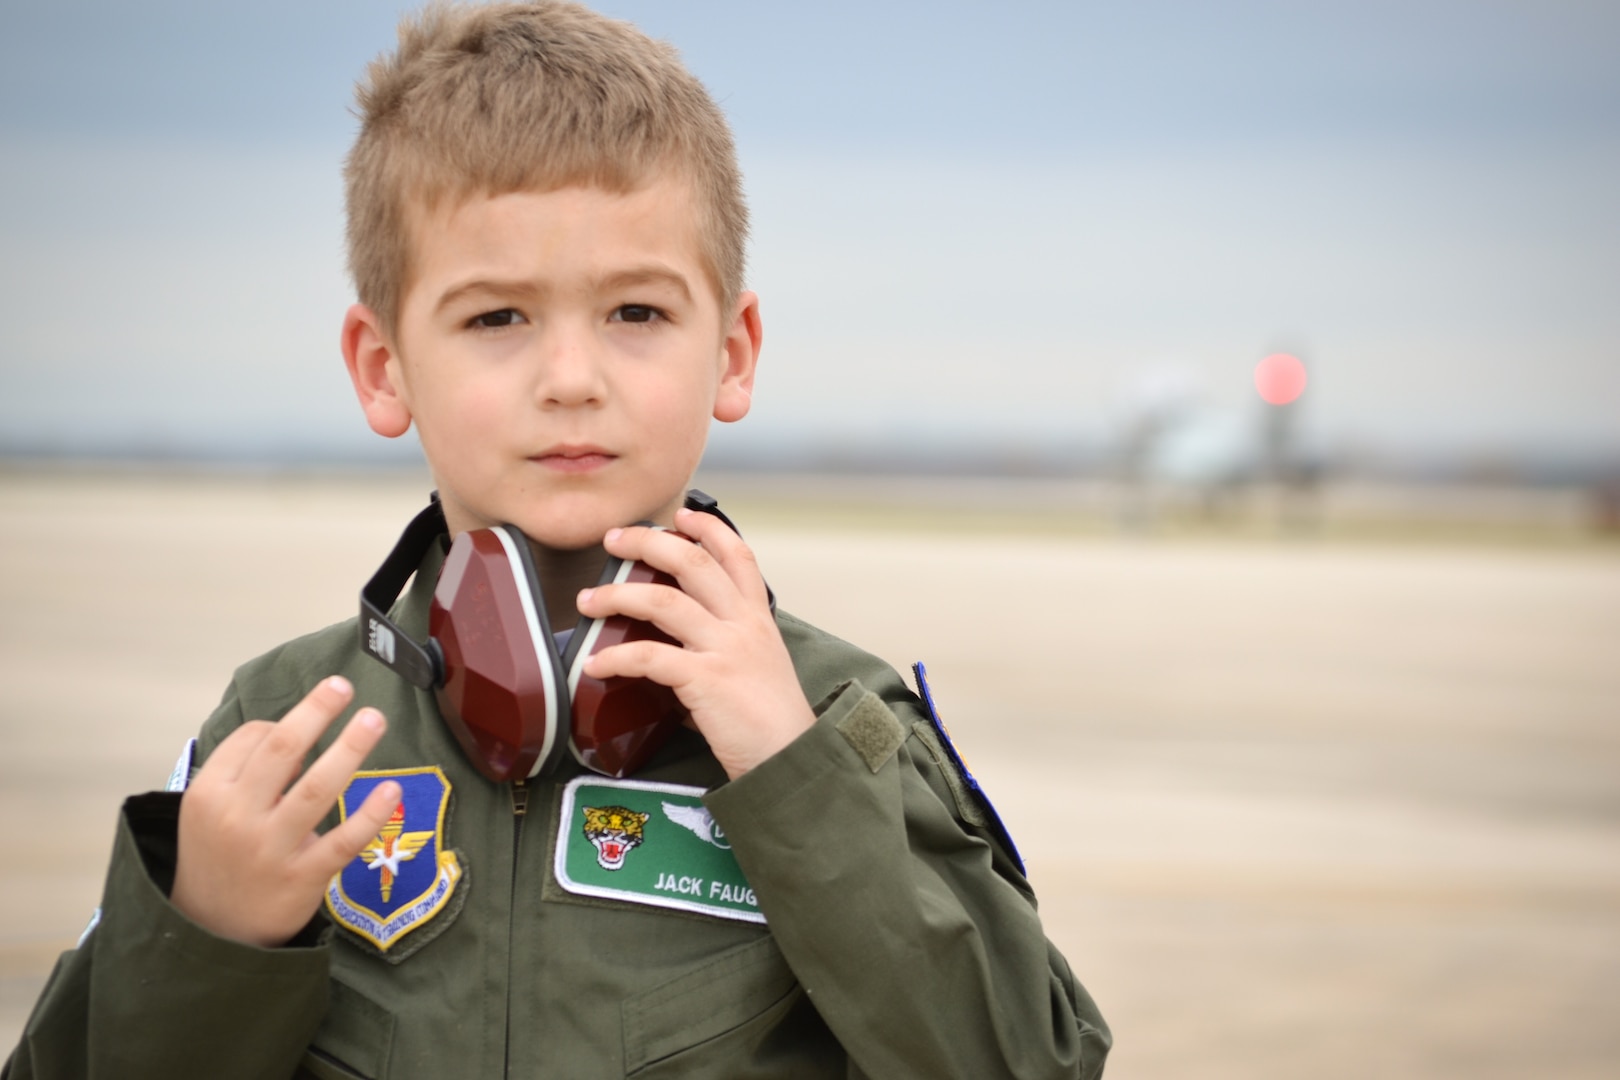 Jack Faught participated in Joint Base San Antonio’s Pilot for a Day program Dec. 12, 2019 at JBSA-Randolph. The Pilot for a Day program supports children with lifelong disabilities, providing them a once-in-a-lifetime experience in the life of a U.S. Air Force pilot by accompanying them through various units on base packed with personalized pilot experiences.